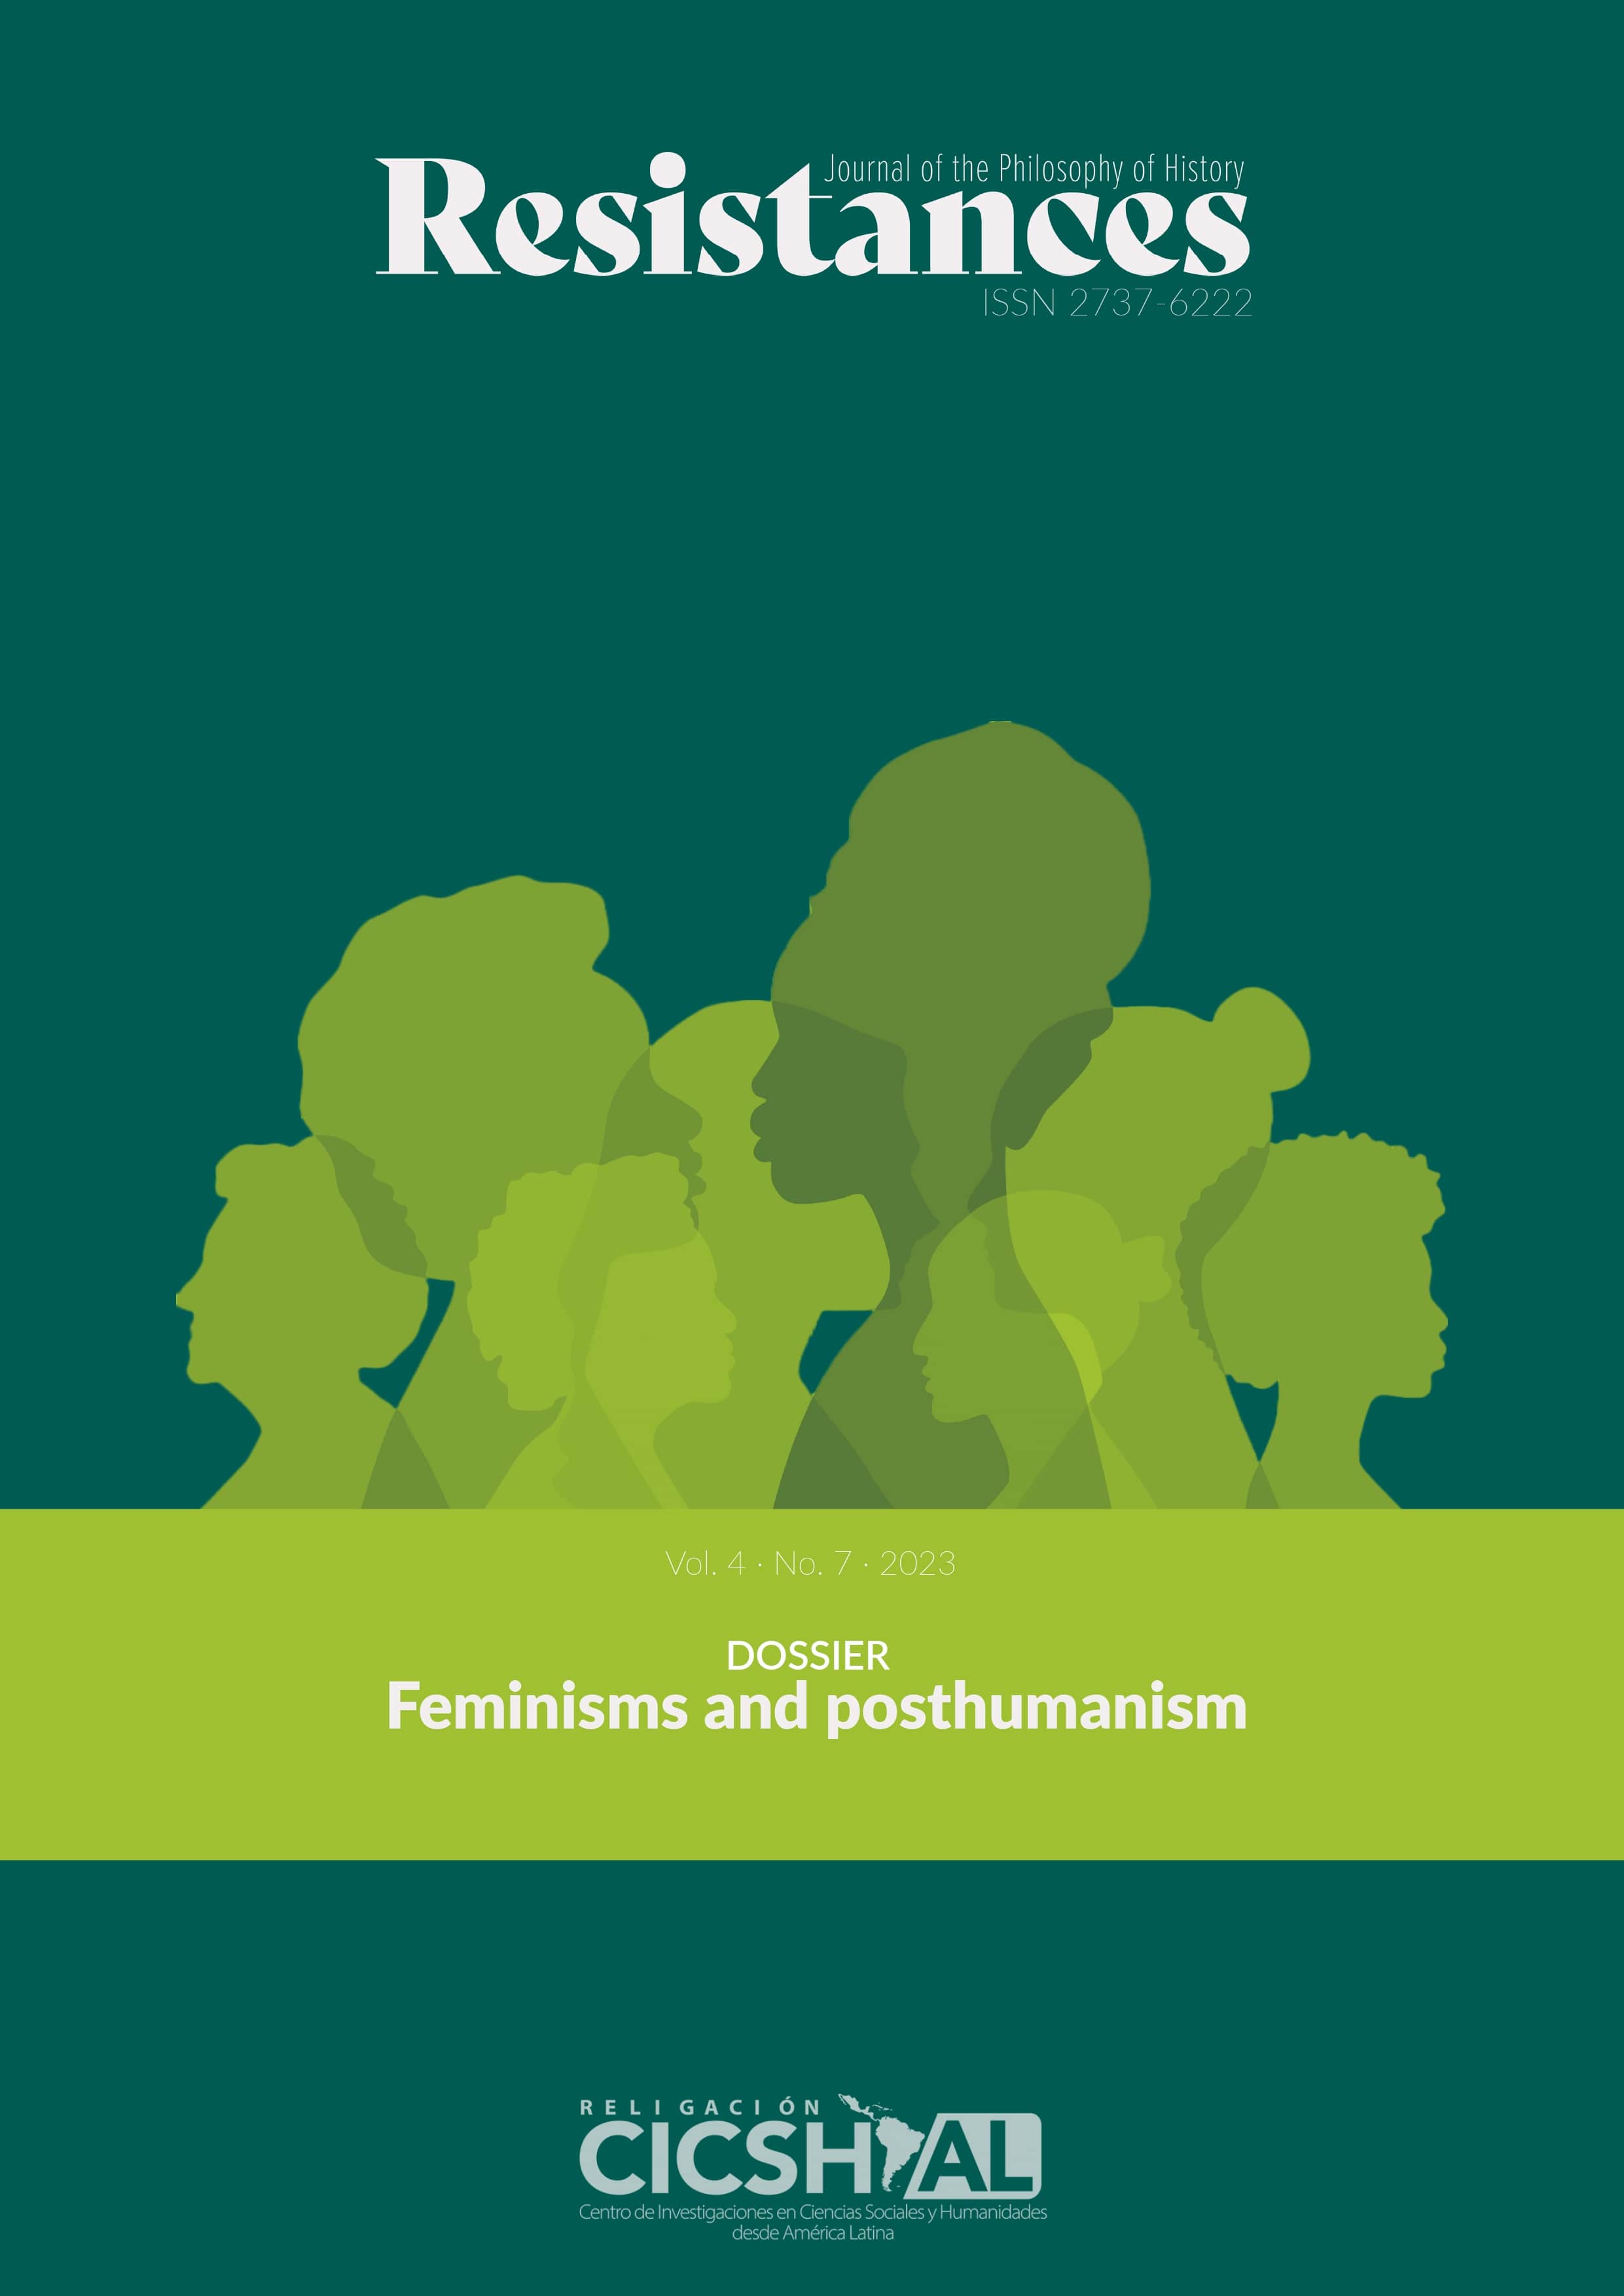 Presentation of the Dossier: Feminisms and posthumanism